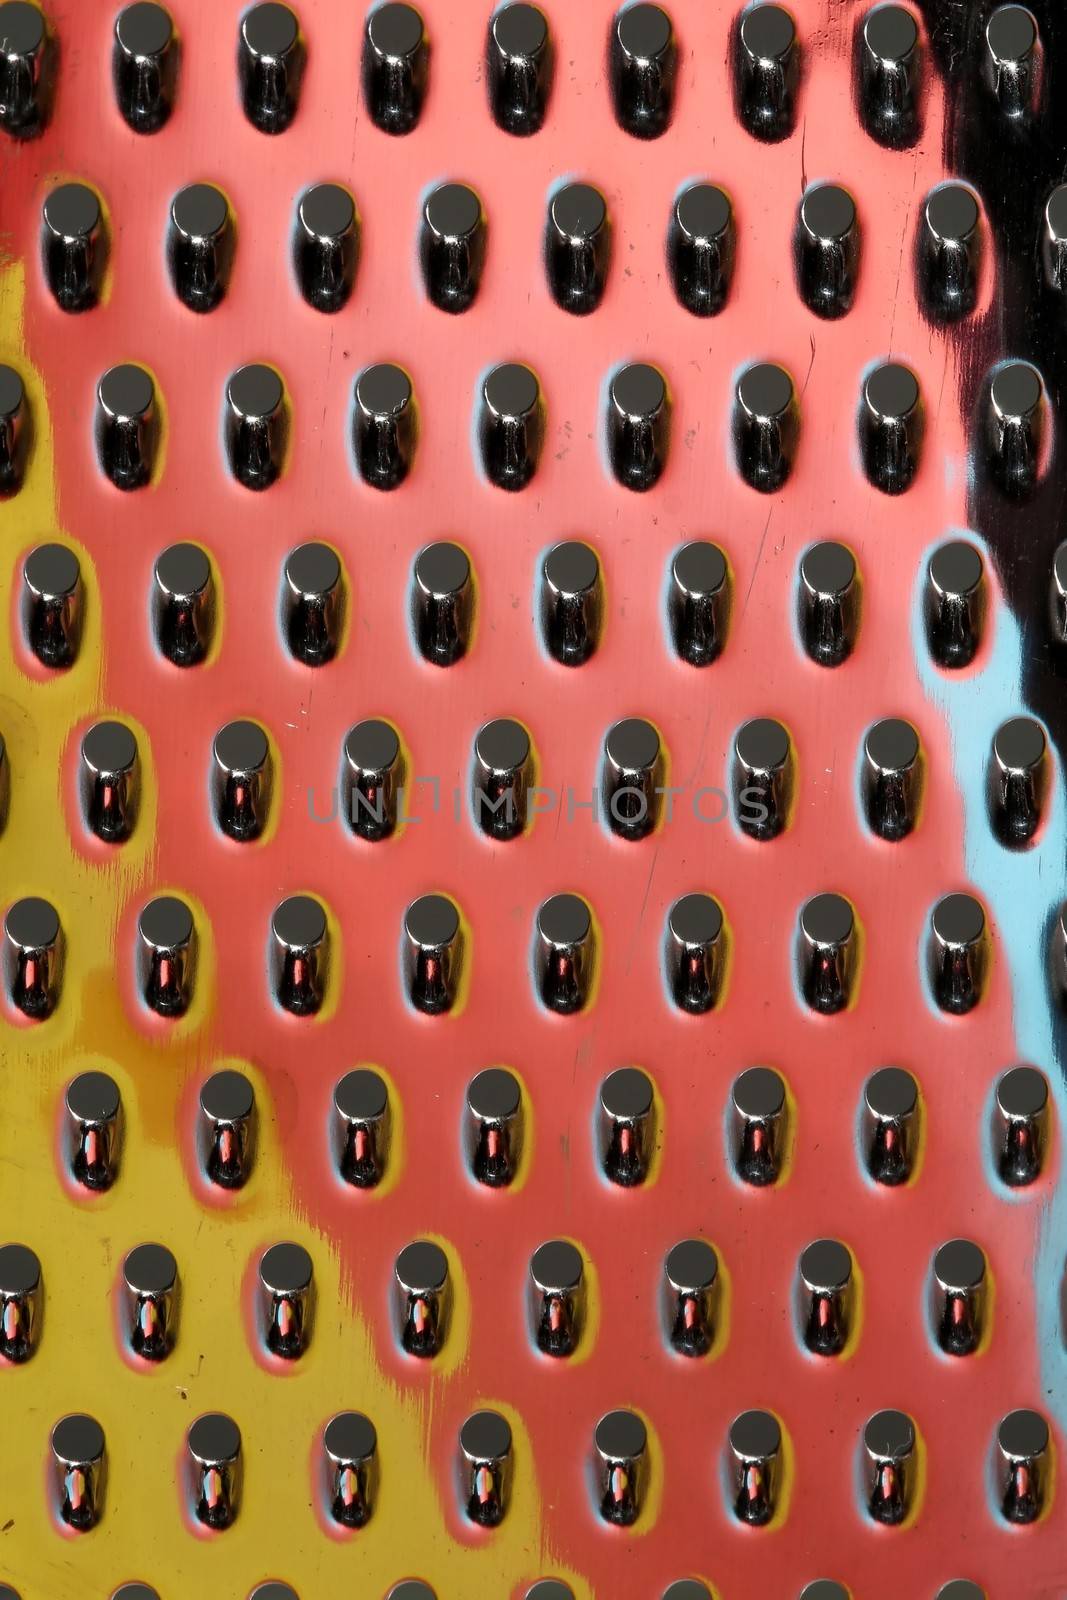 Macro view of a stainless steel cheese grater with reflected colors